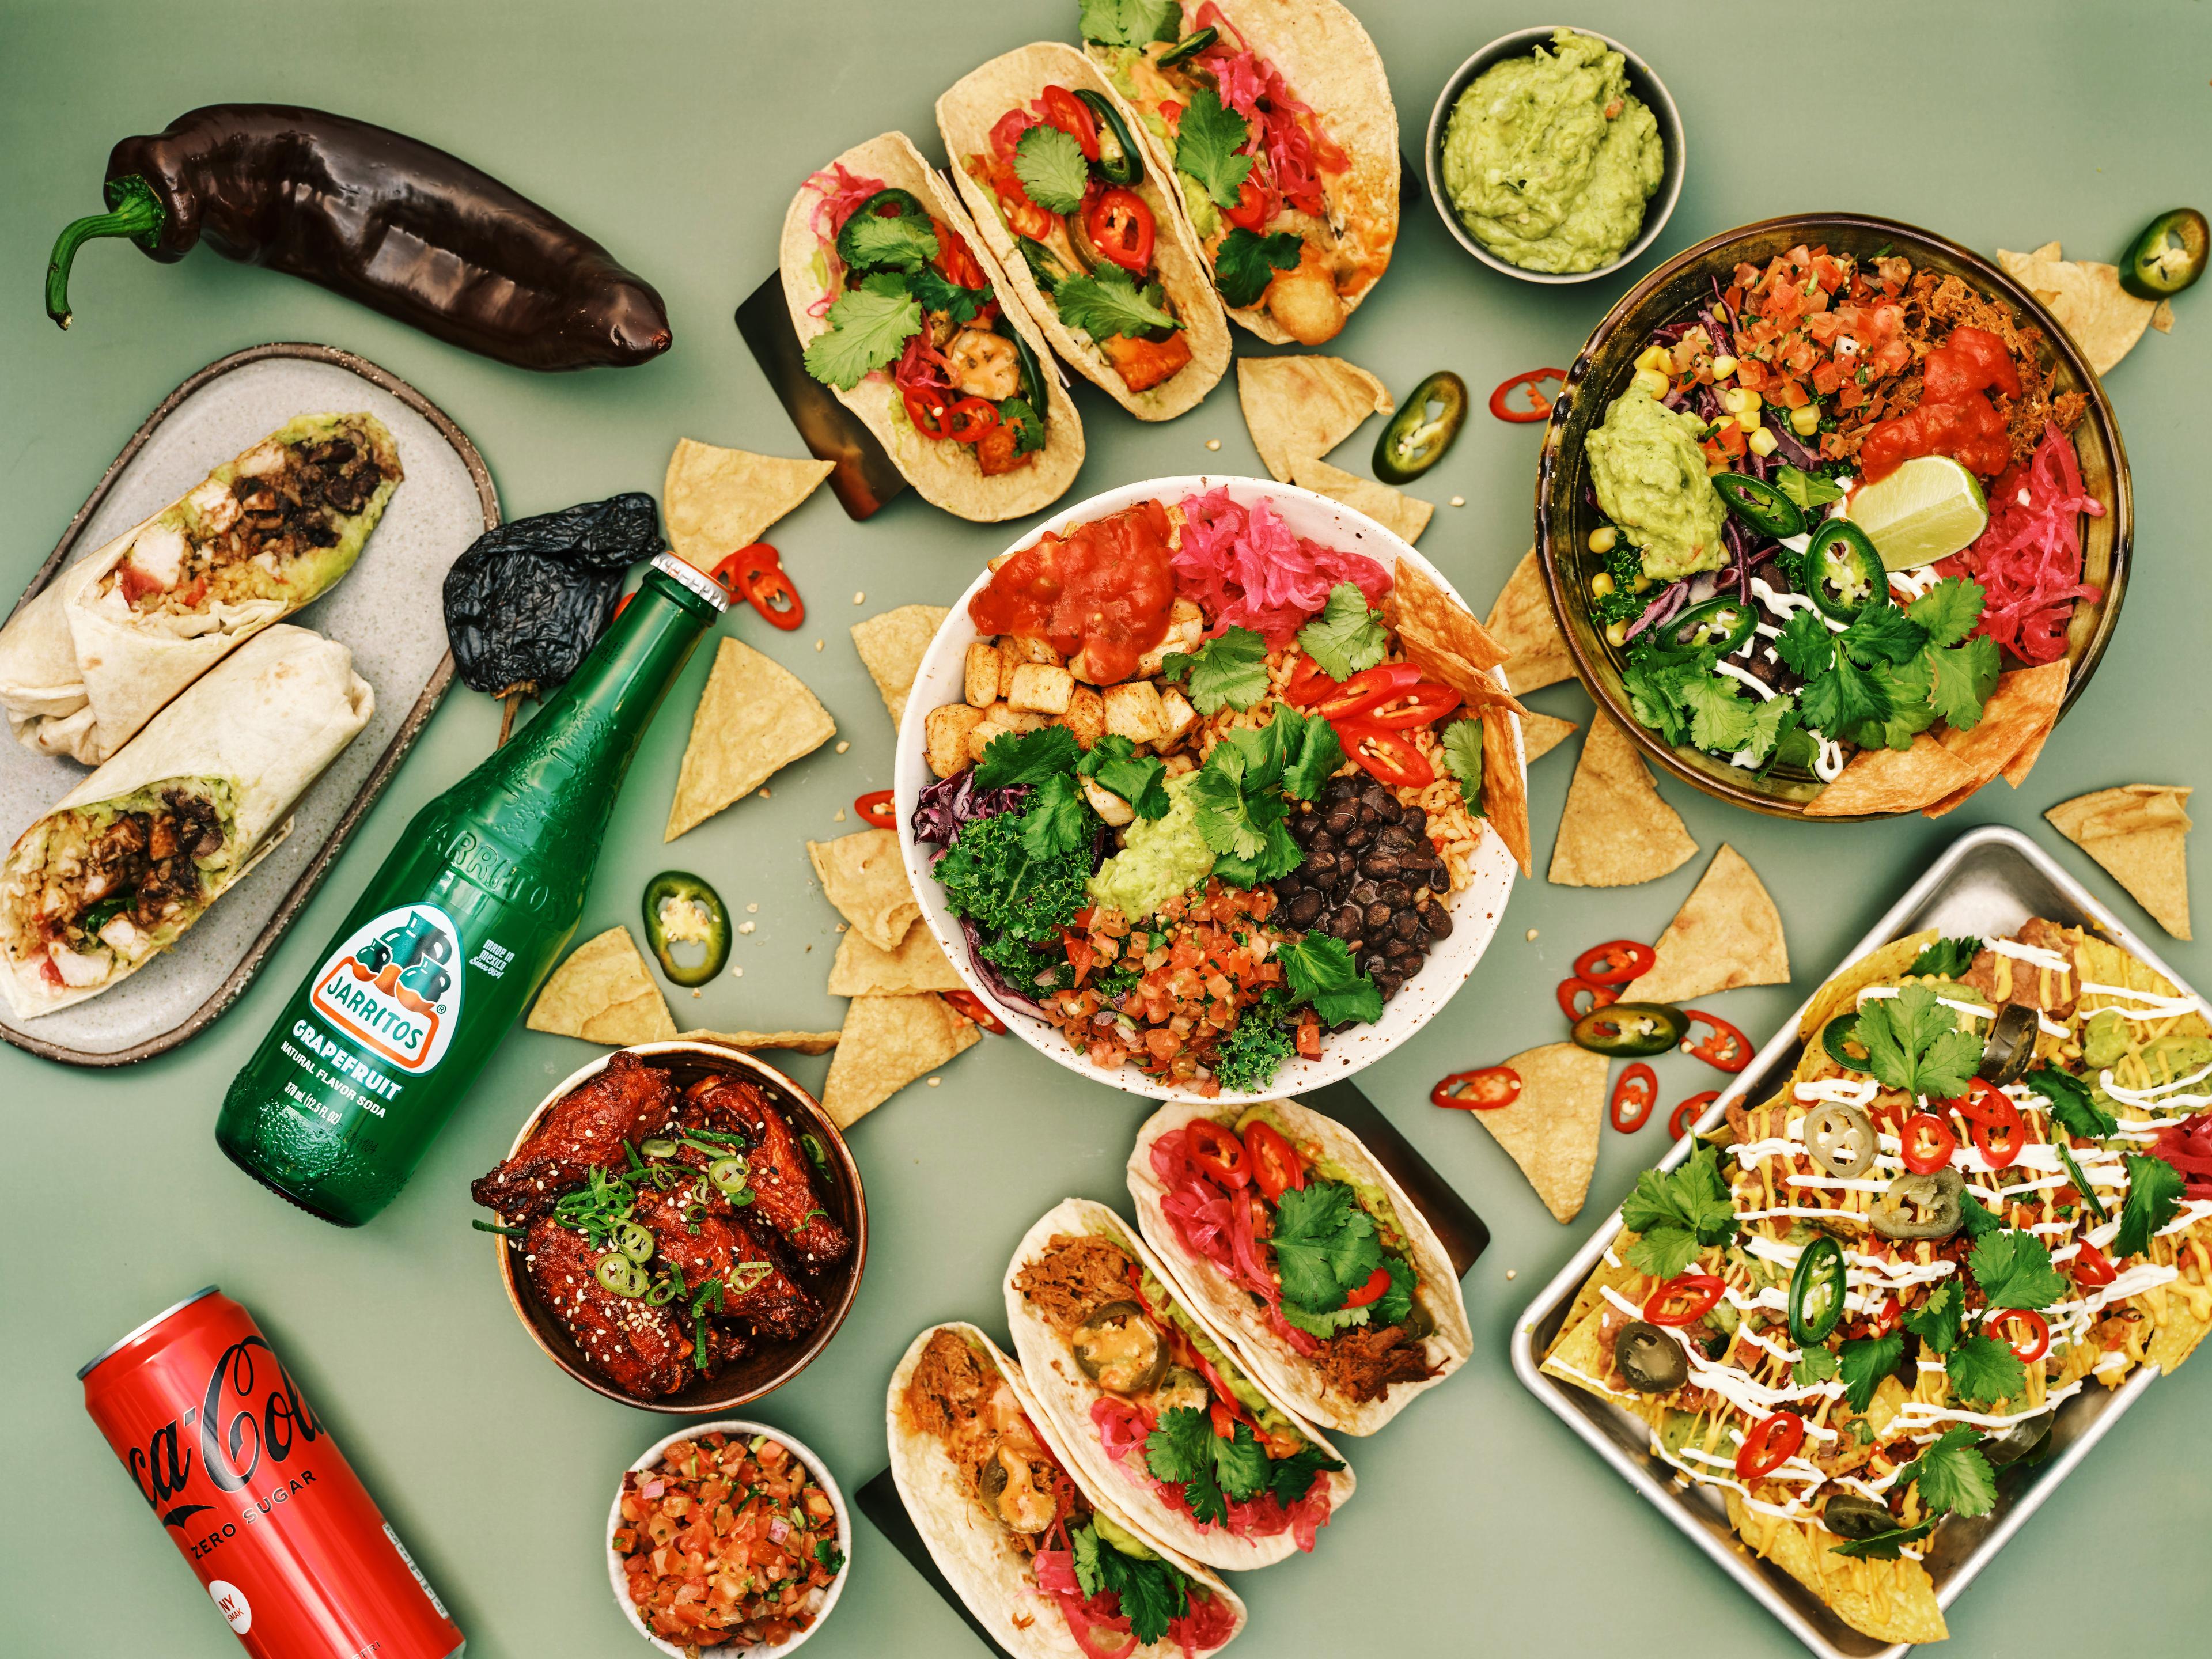 Image of a Mexican feast with nachos, tacos and burritos on a green background